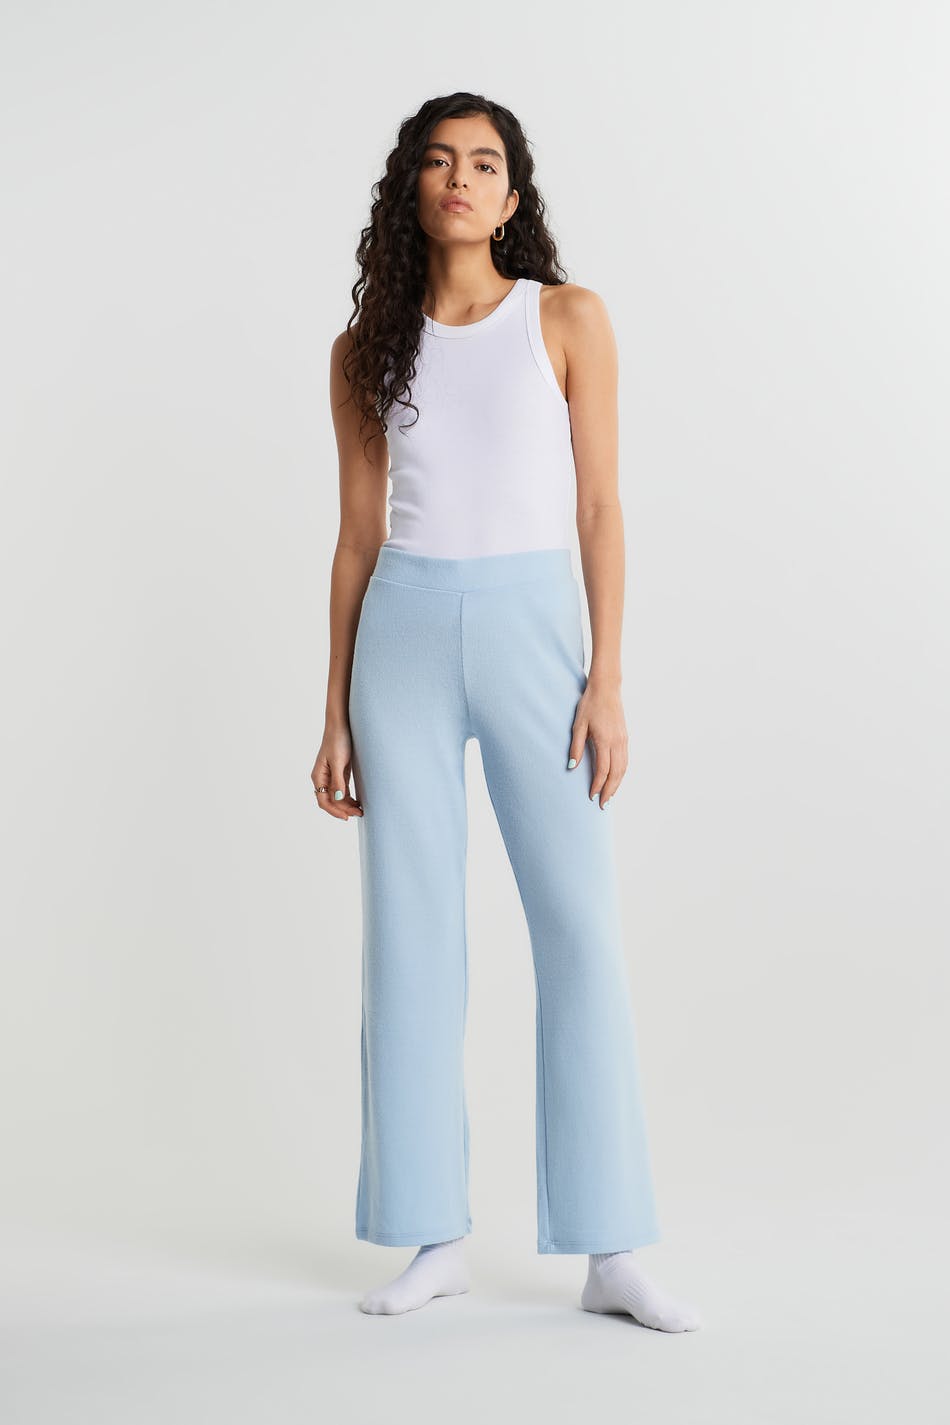 Gina Tricot Regular Chino trousers 'Ella' in Black | ABOUT YOU